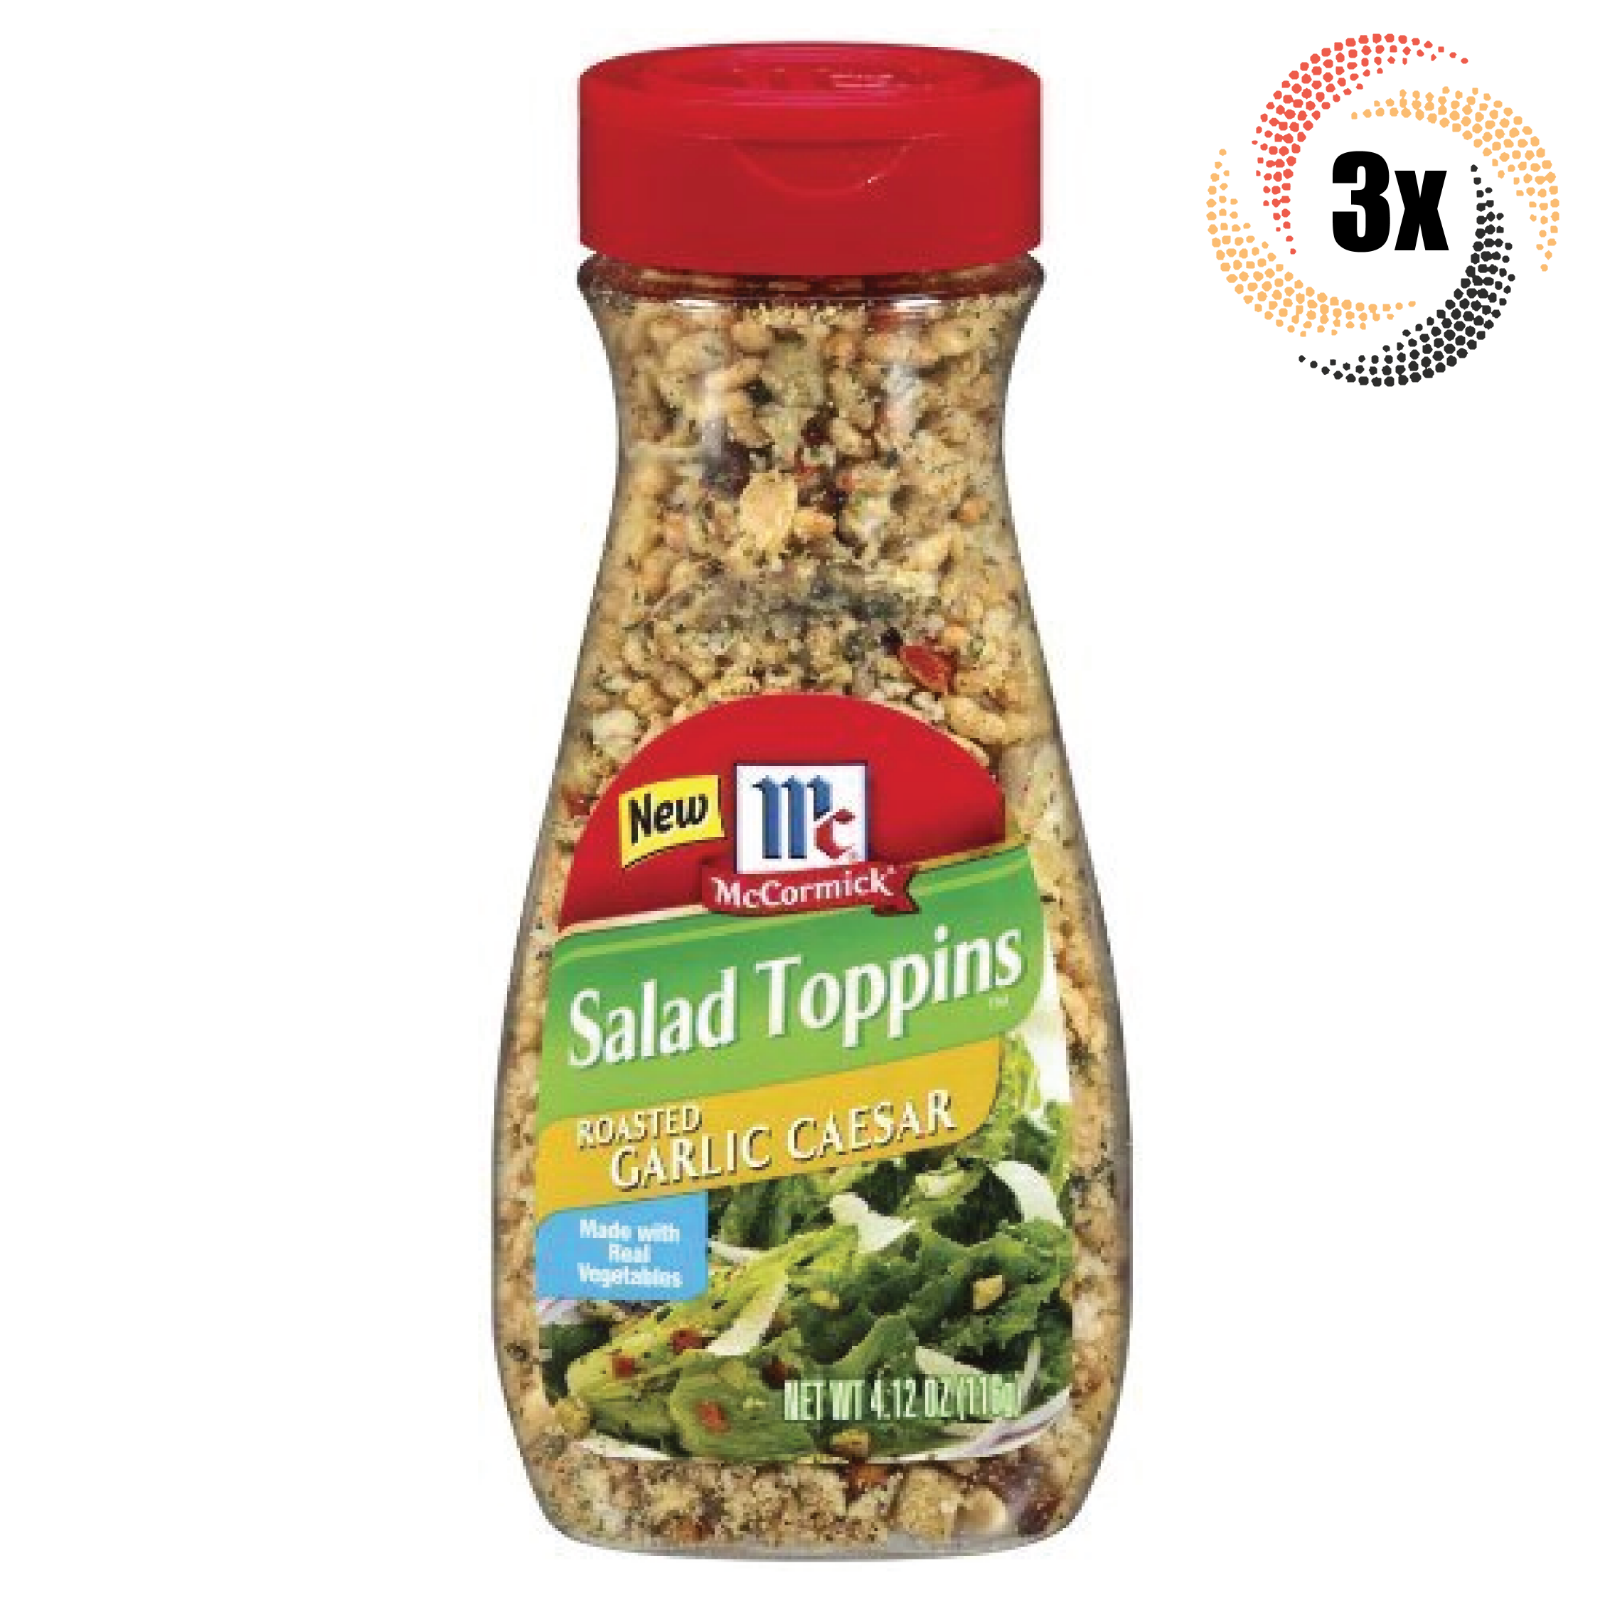 Primary image for 3x Shaker McCormick Salad Toppins Roasted Garlic Caesar Flavor | 4.12oz